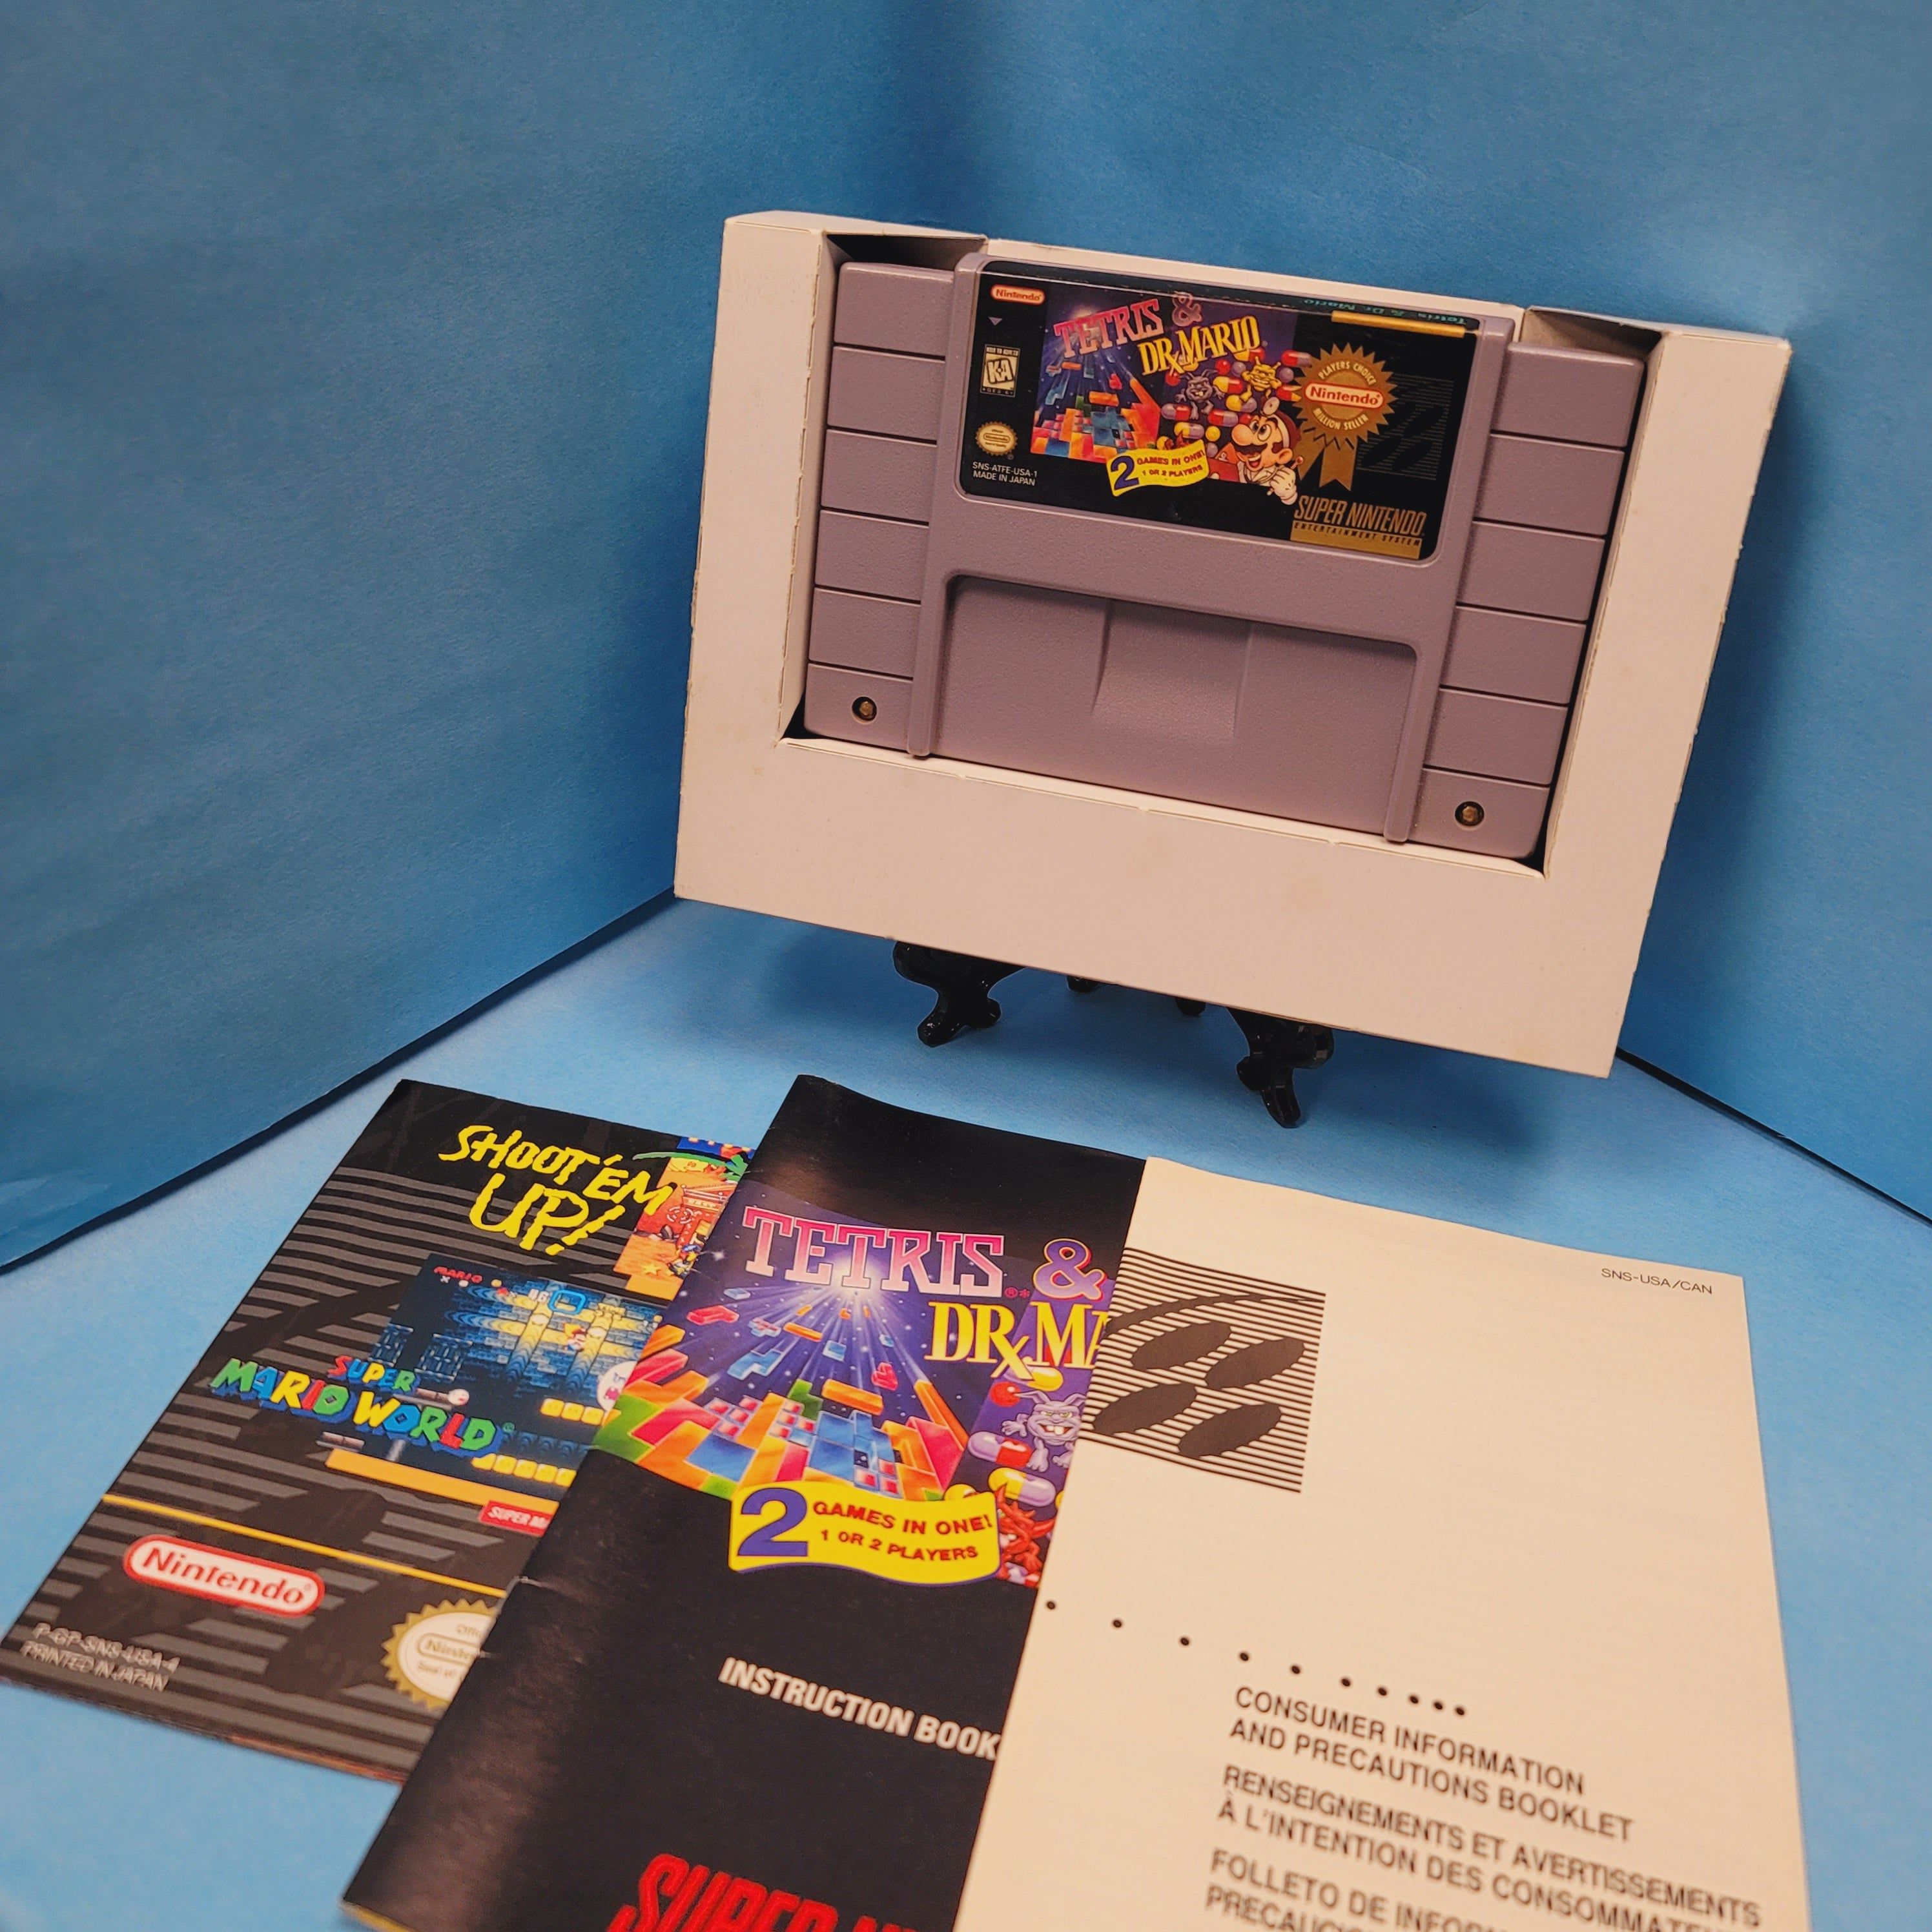 SNES - Tetris & Dr. Mario (Complete in Box / Player's Choice / A+ / With Manual)